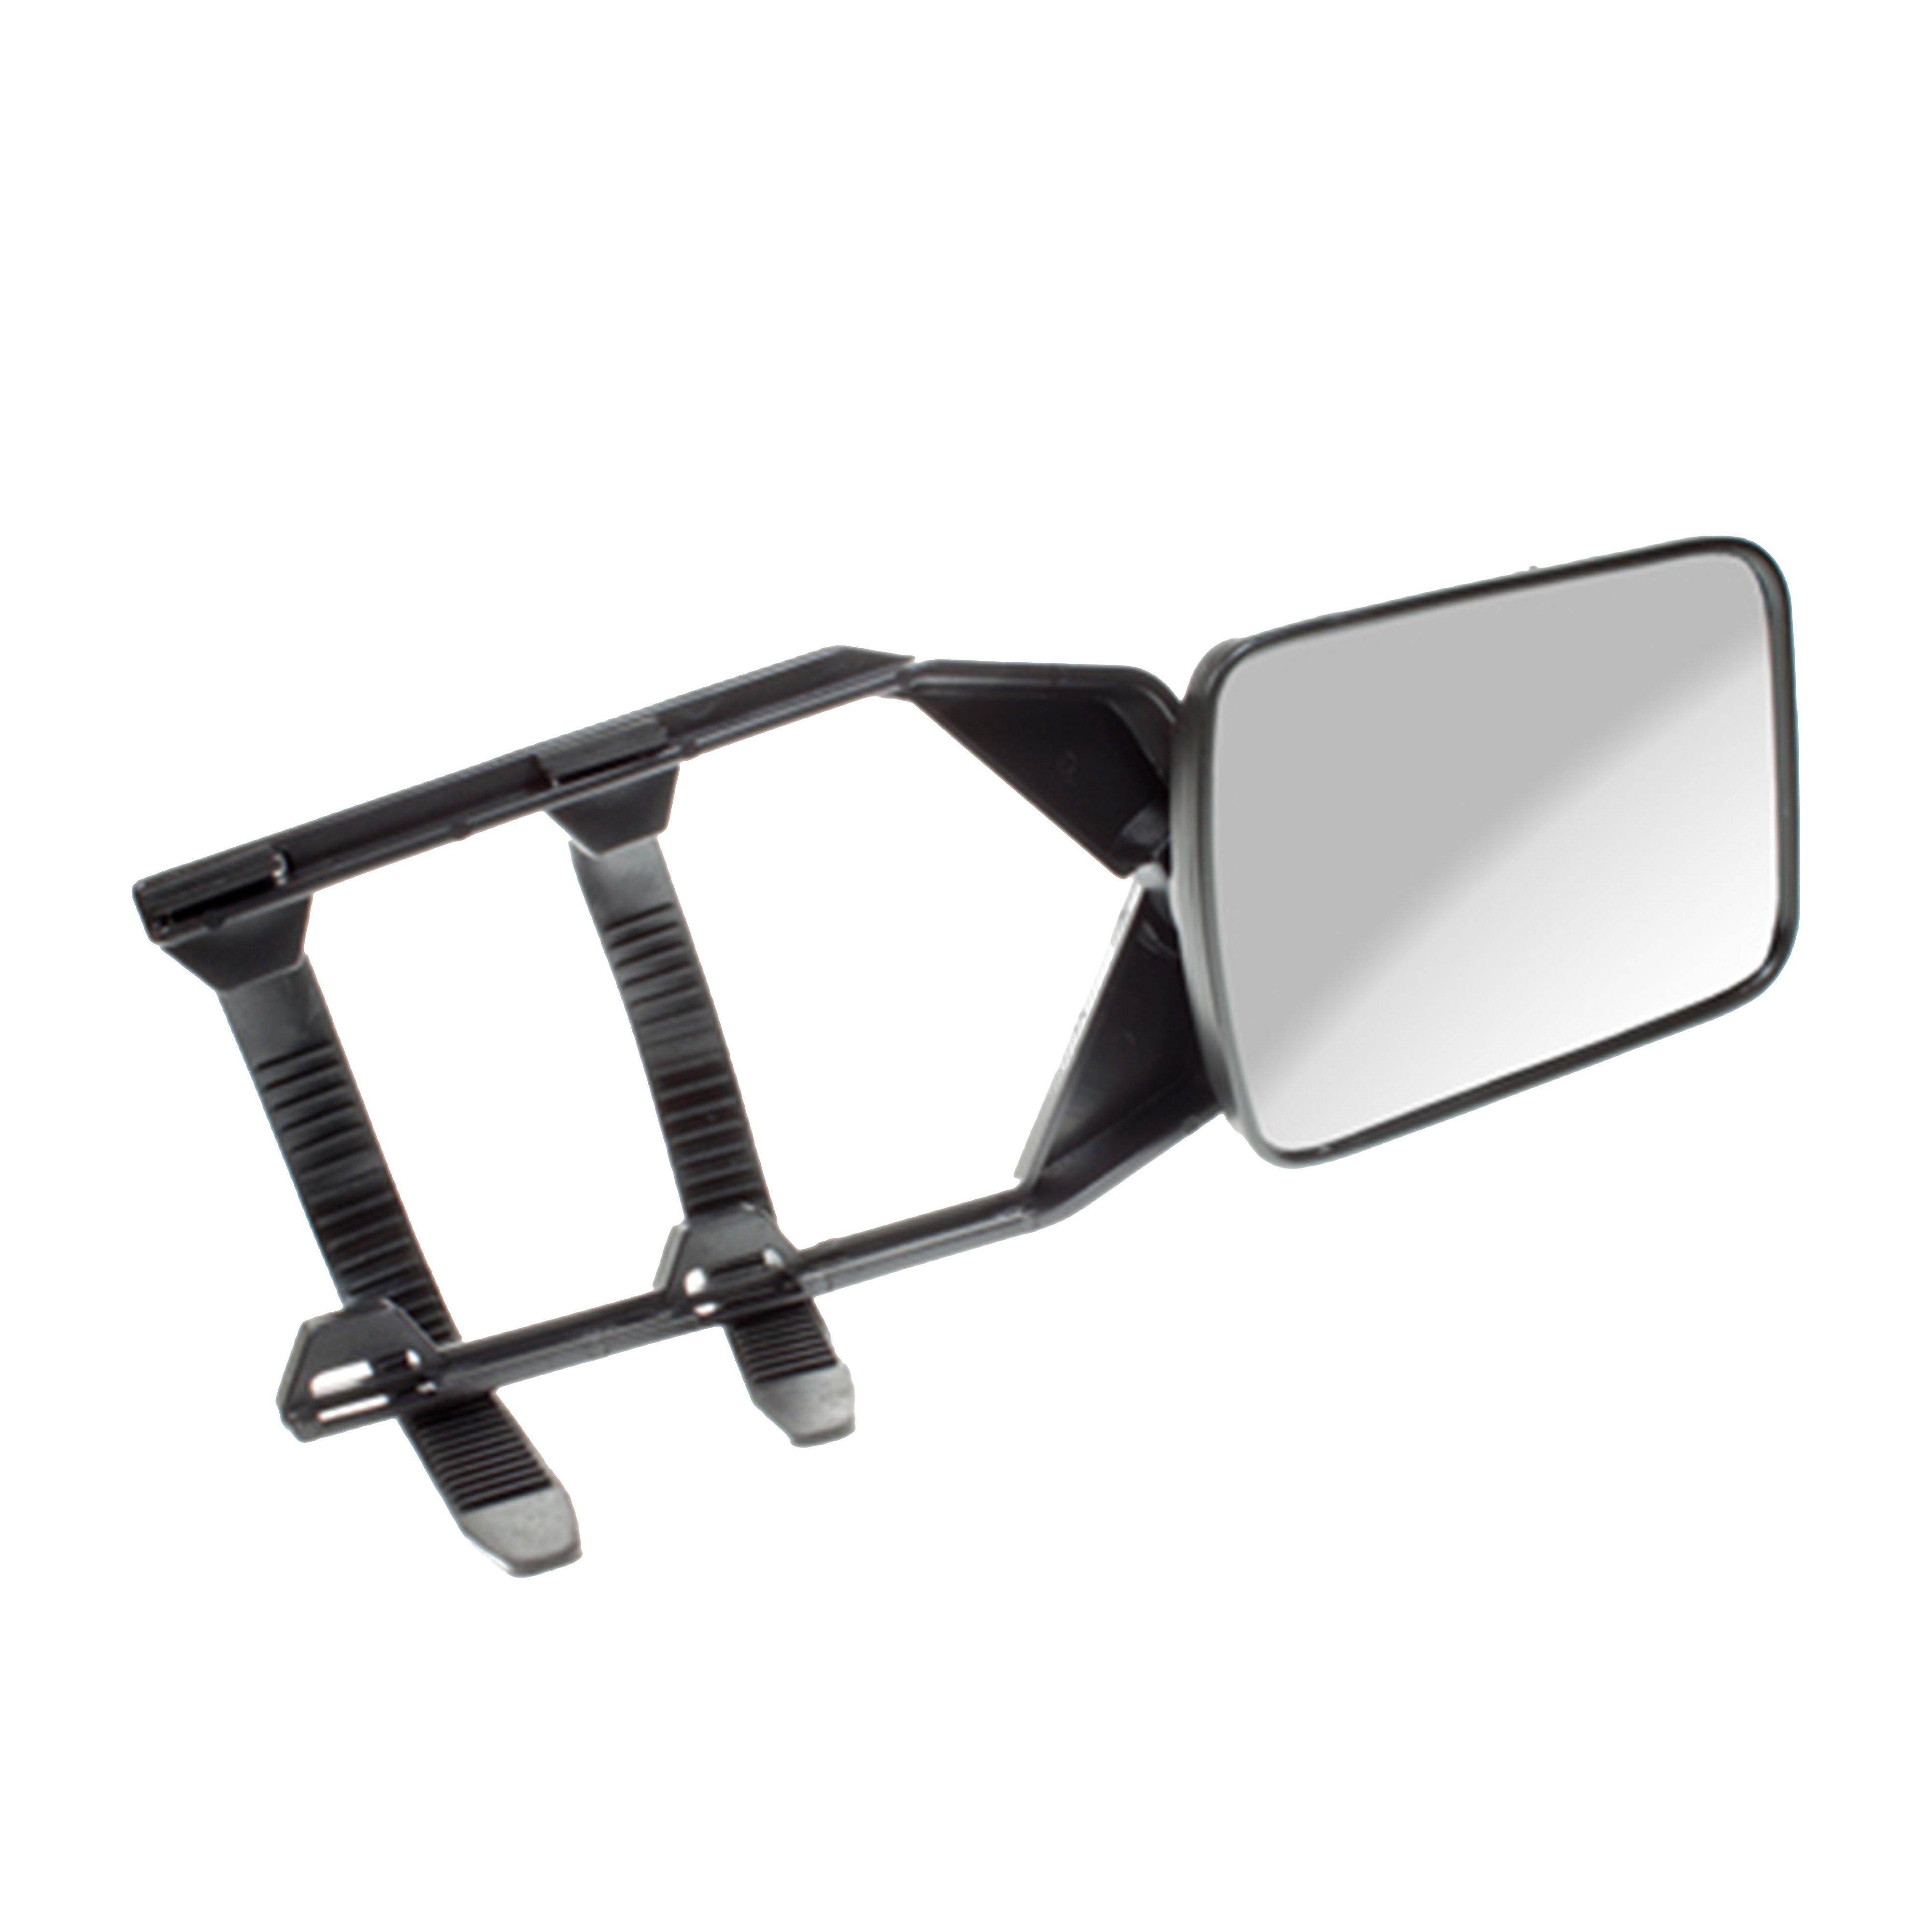 Maypole Towing Mirrors (pair) Review